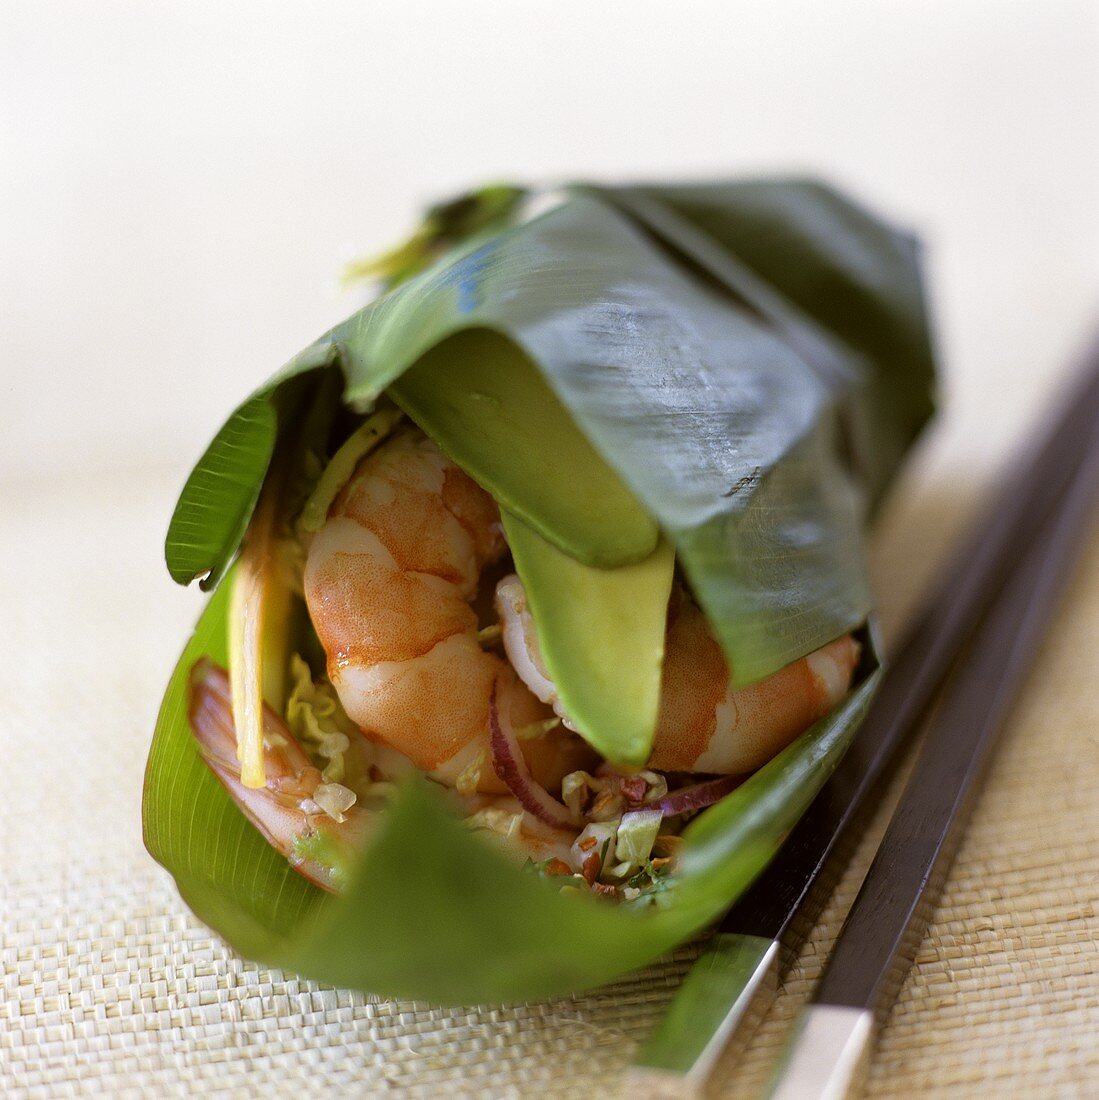 Shrimp and Avocado with Vegetables Wrapped in a Banana Leaf